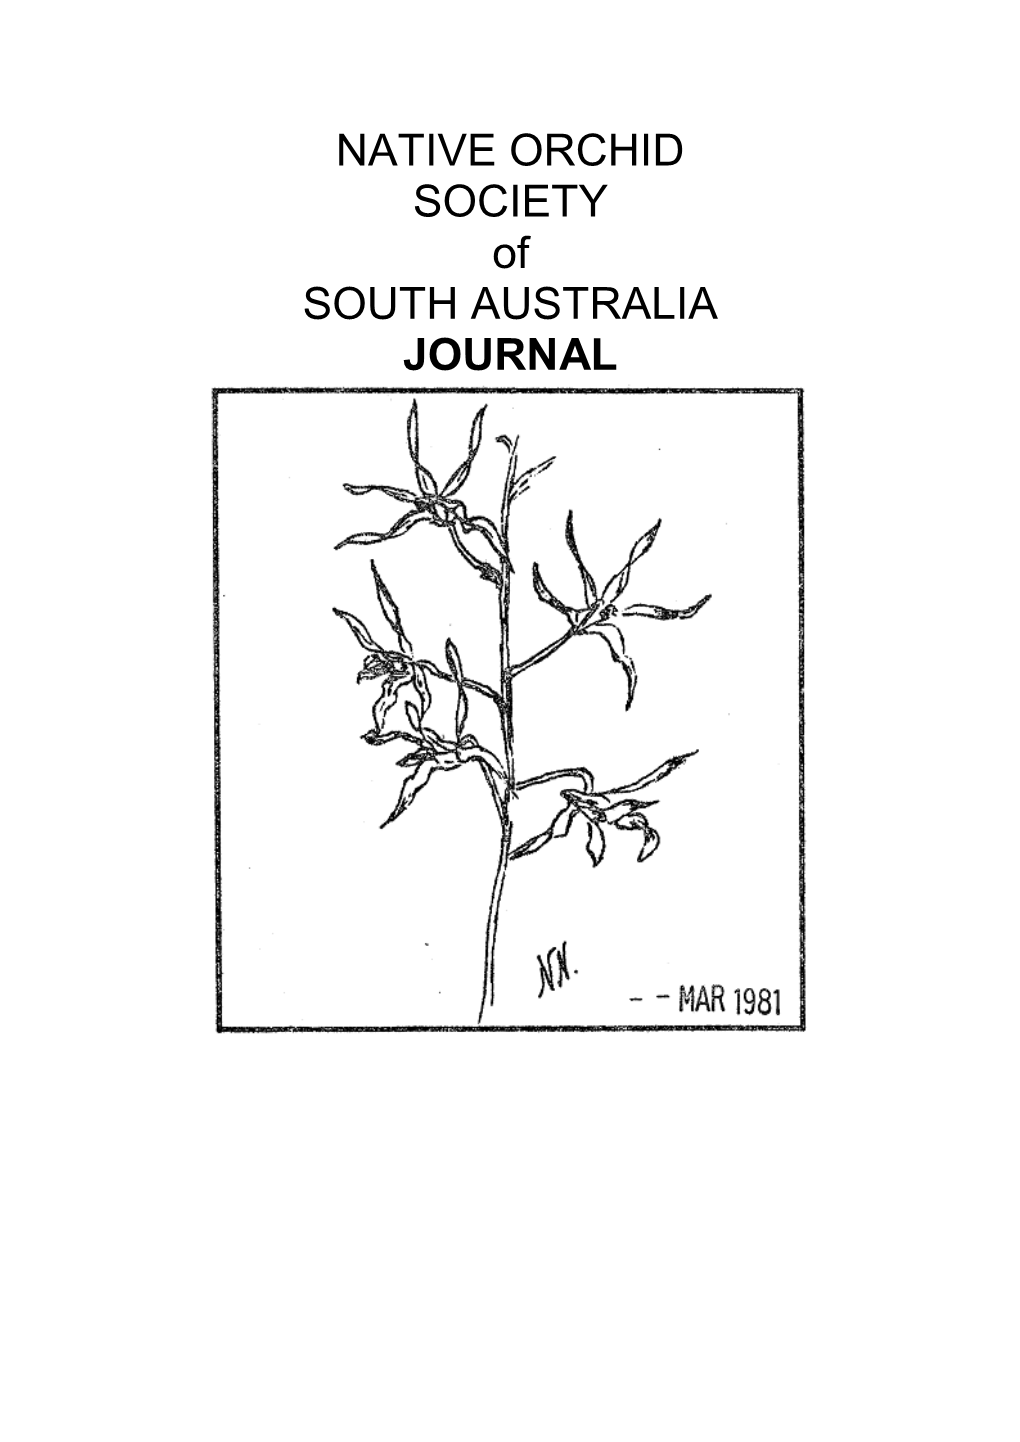 NATIVE ORCHID SOCIETY of SOUTH AUSTRALIA JOURNAL